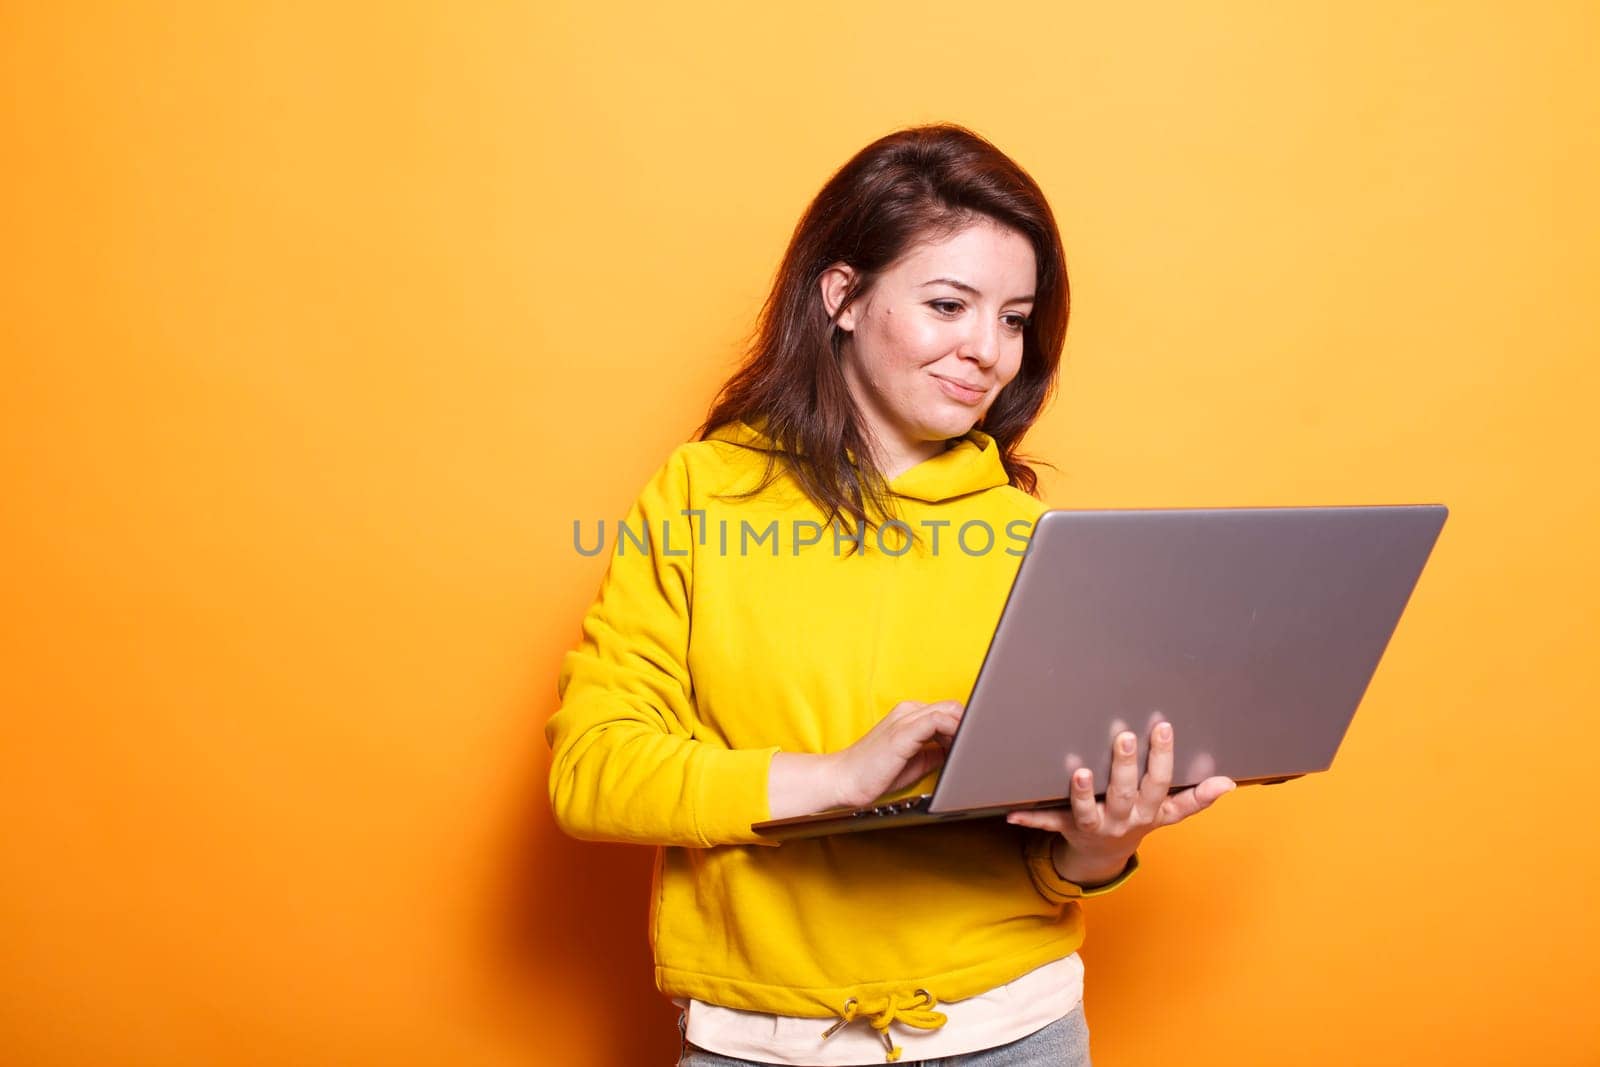 In the studio, young adult looks at a laptop to use technology on camera. Portrait of a modern woman standing over an isolated background, holding a digital device and surfing the internet.